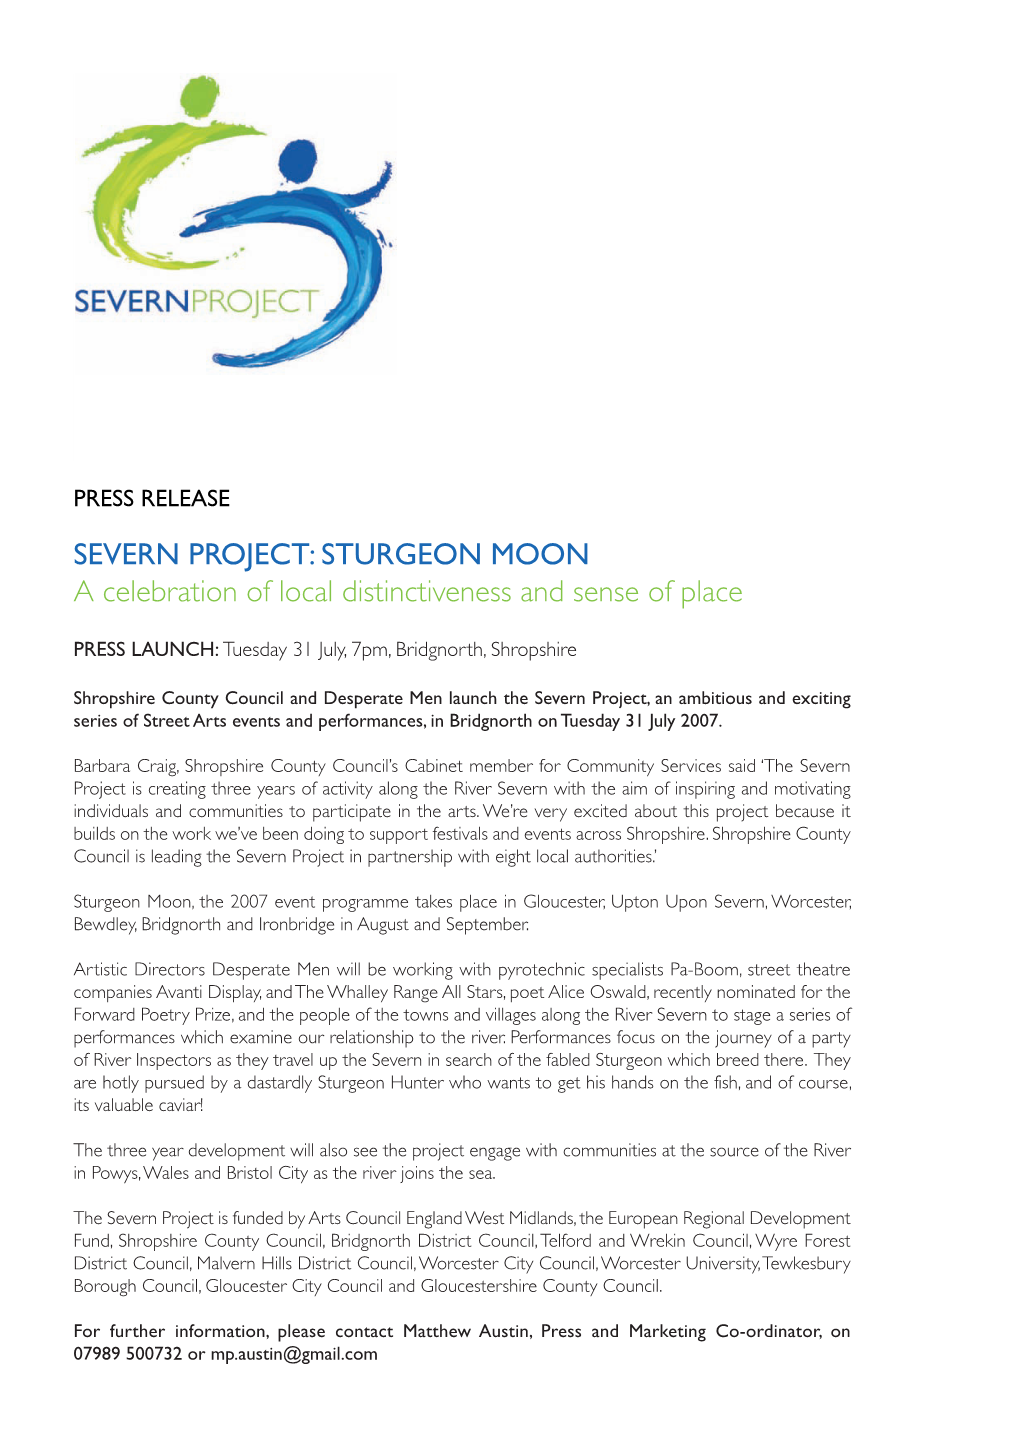 SEVERN PROJECT: STURGEON MOON a Celebration of Local Distinctiveness and Sense of Place